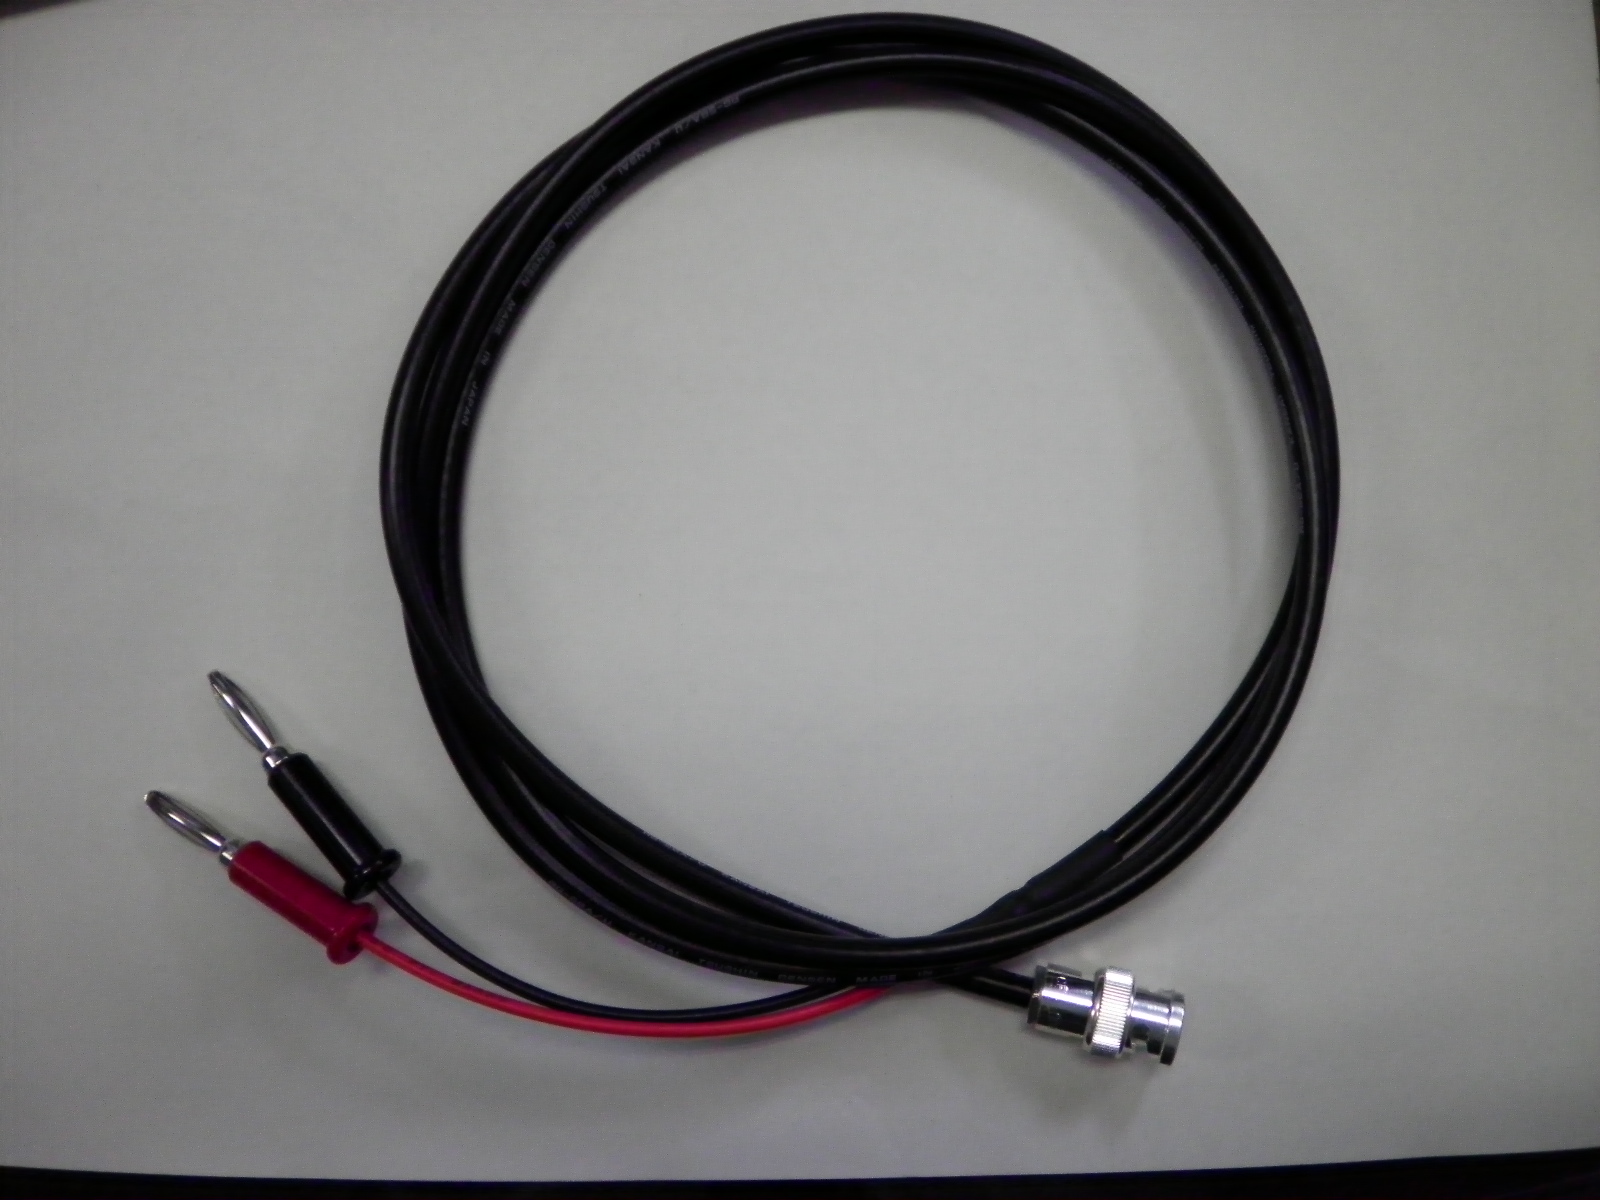 http://www.cable-harness-ex.com/case/SANY0002.JPG